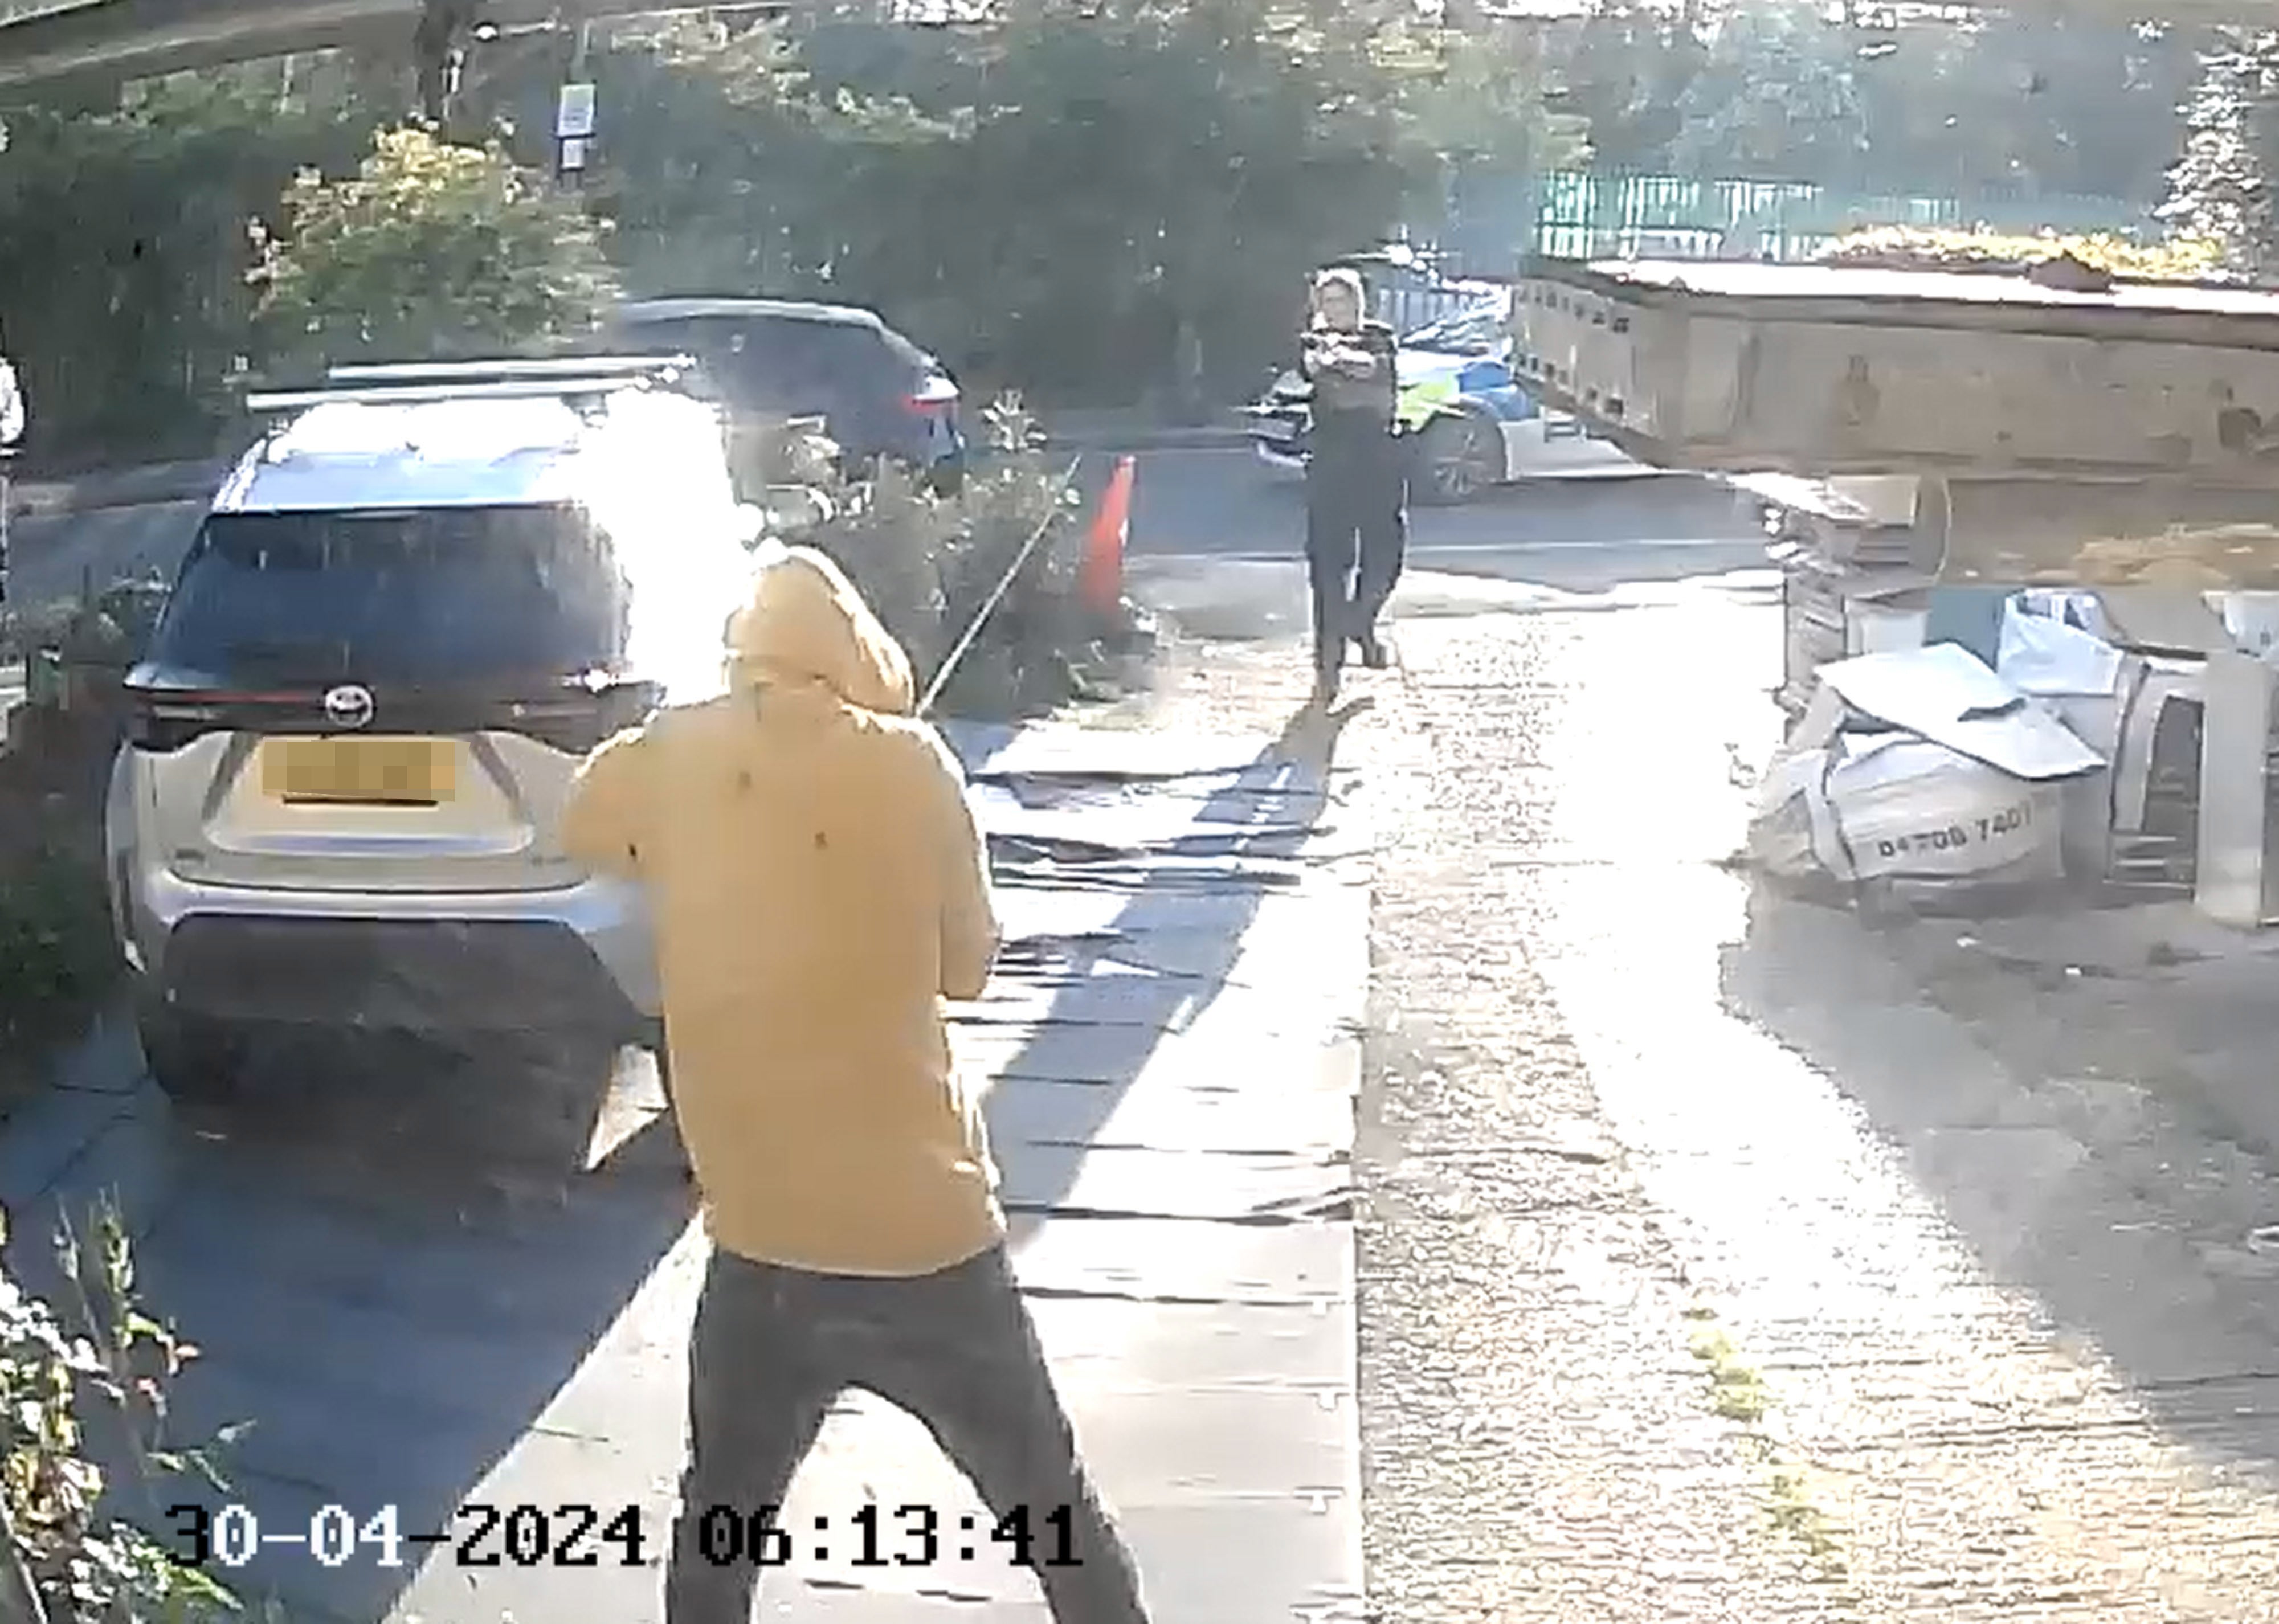 Doorbell camera footage shows police approaching the sword-wielding man in Hainault